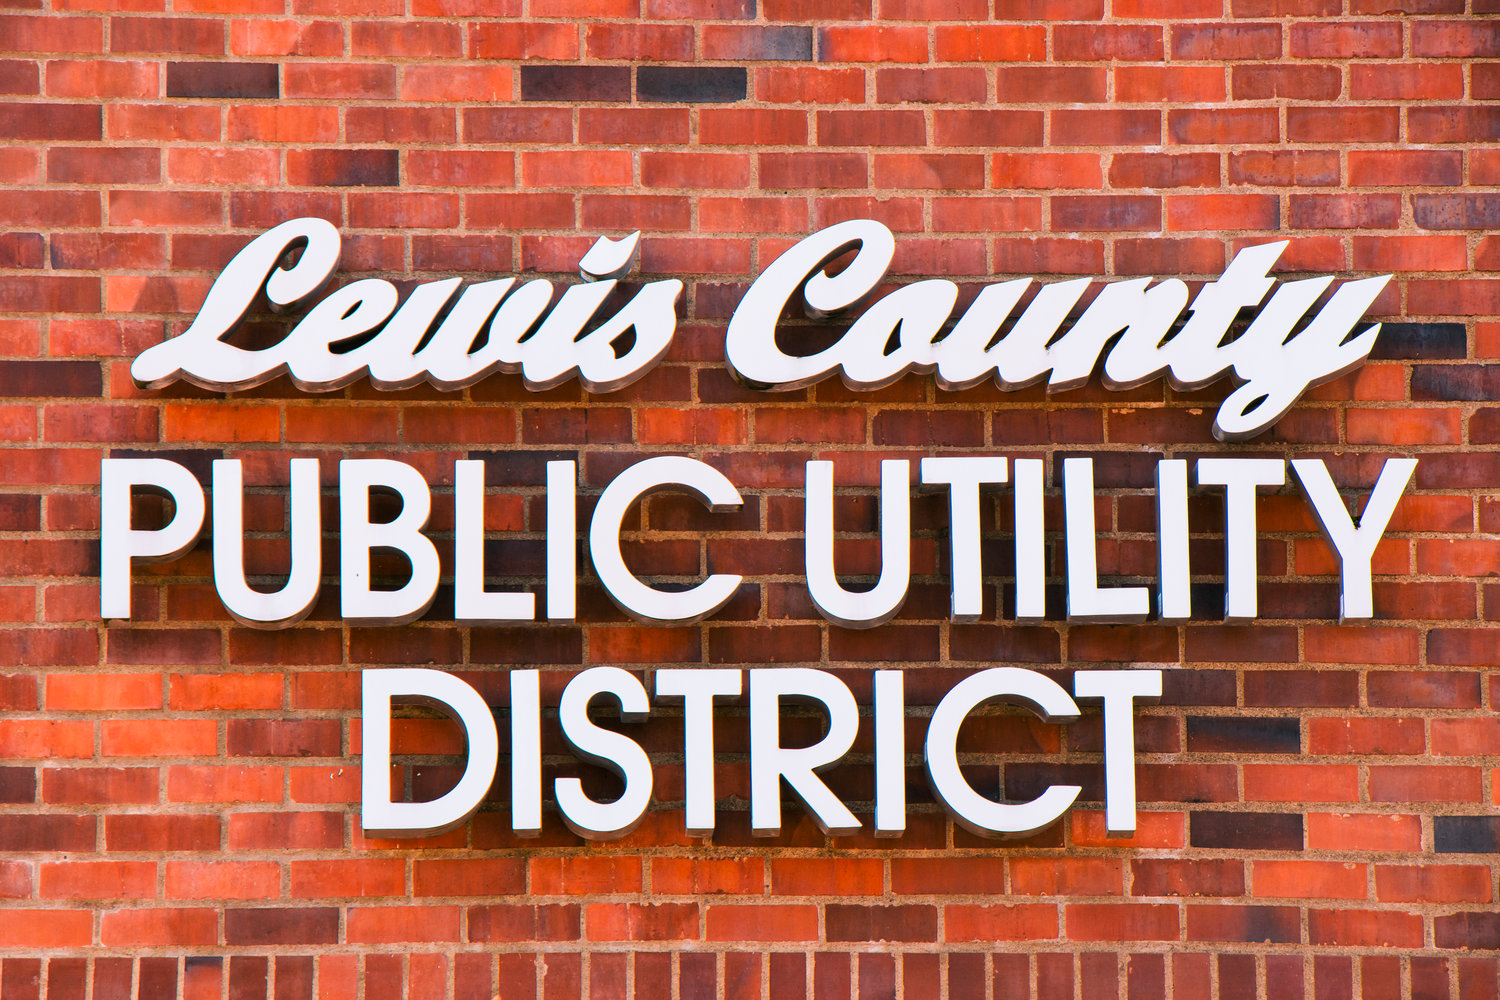 The Lewis County Public Utility District office in Chehalis is located at 321 NW Pacific Avenue.